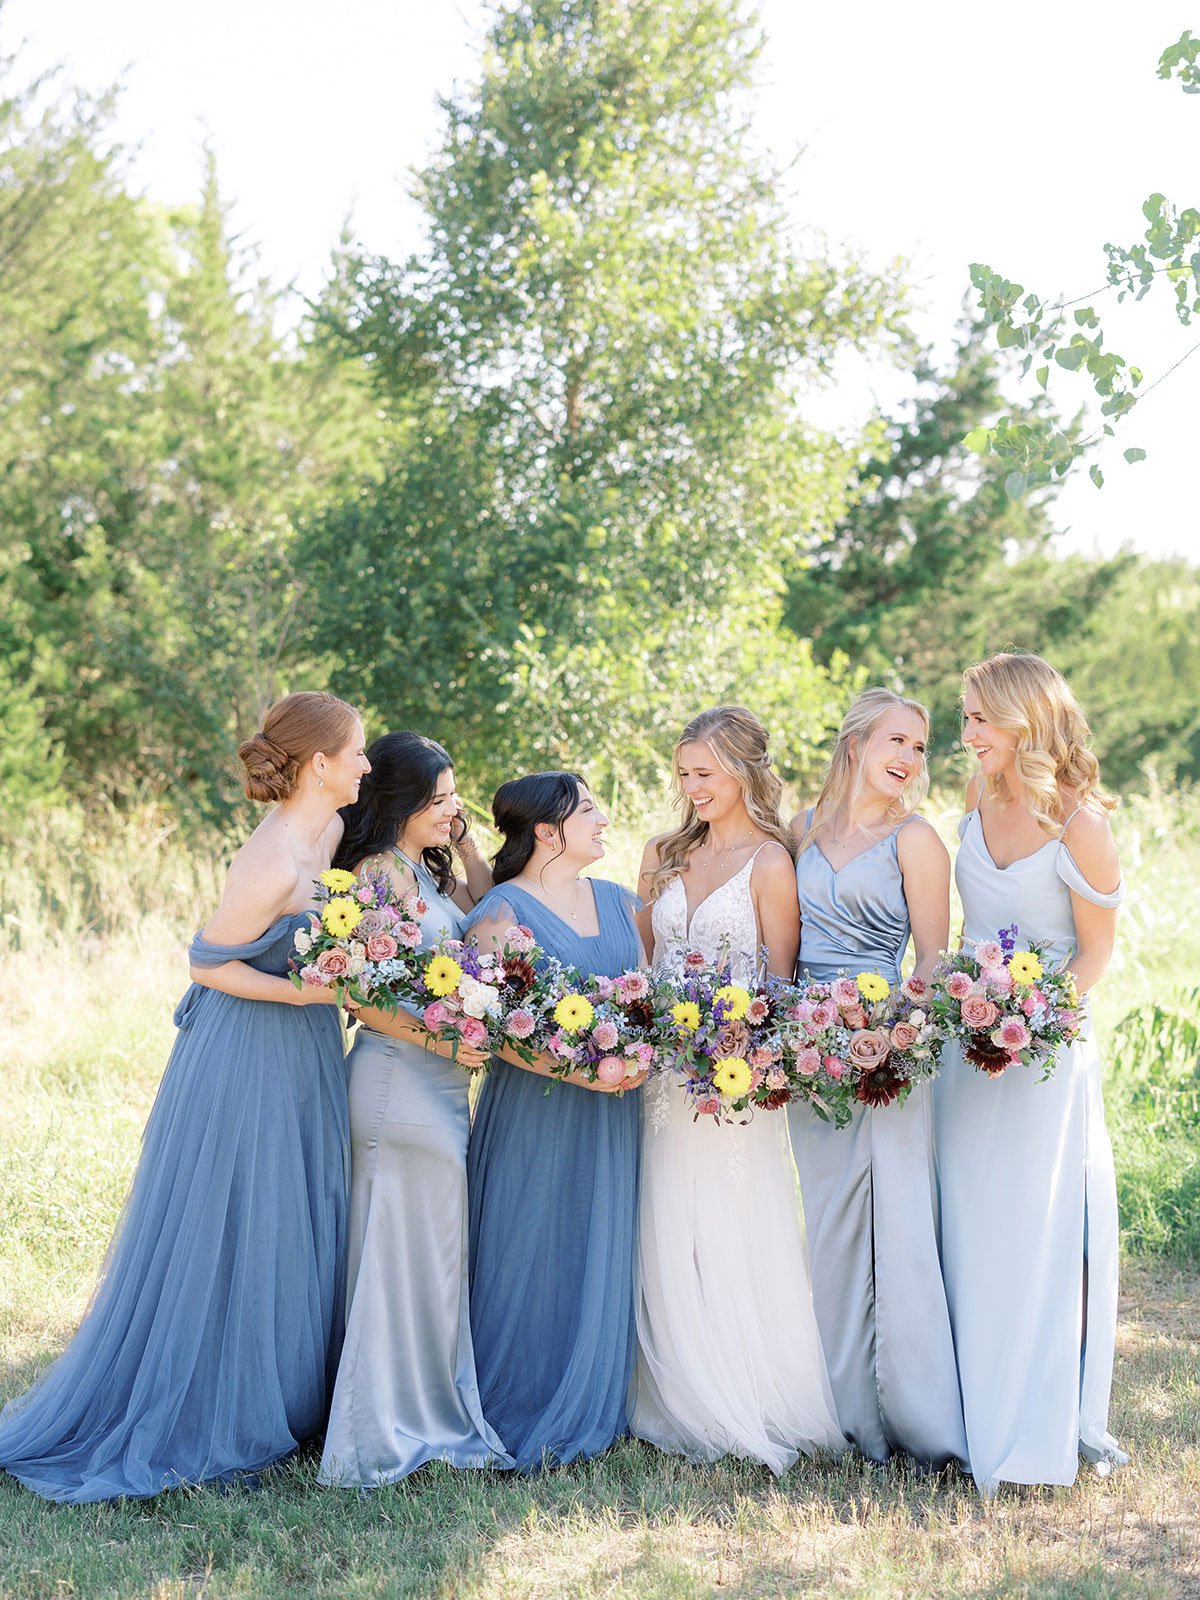 Blue bridesmaid dresses with colorful wildflower flowers